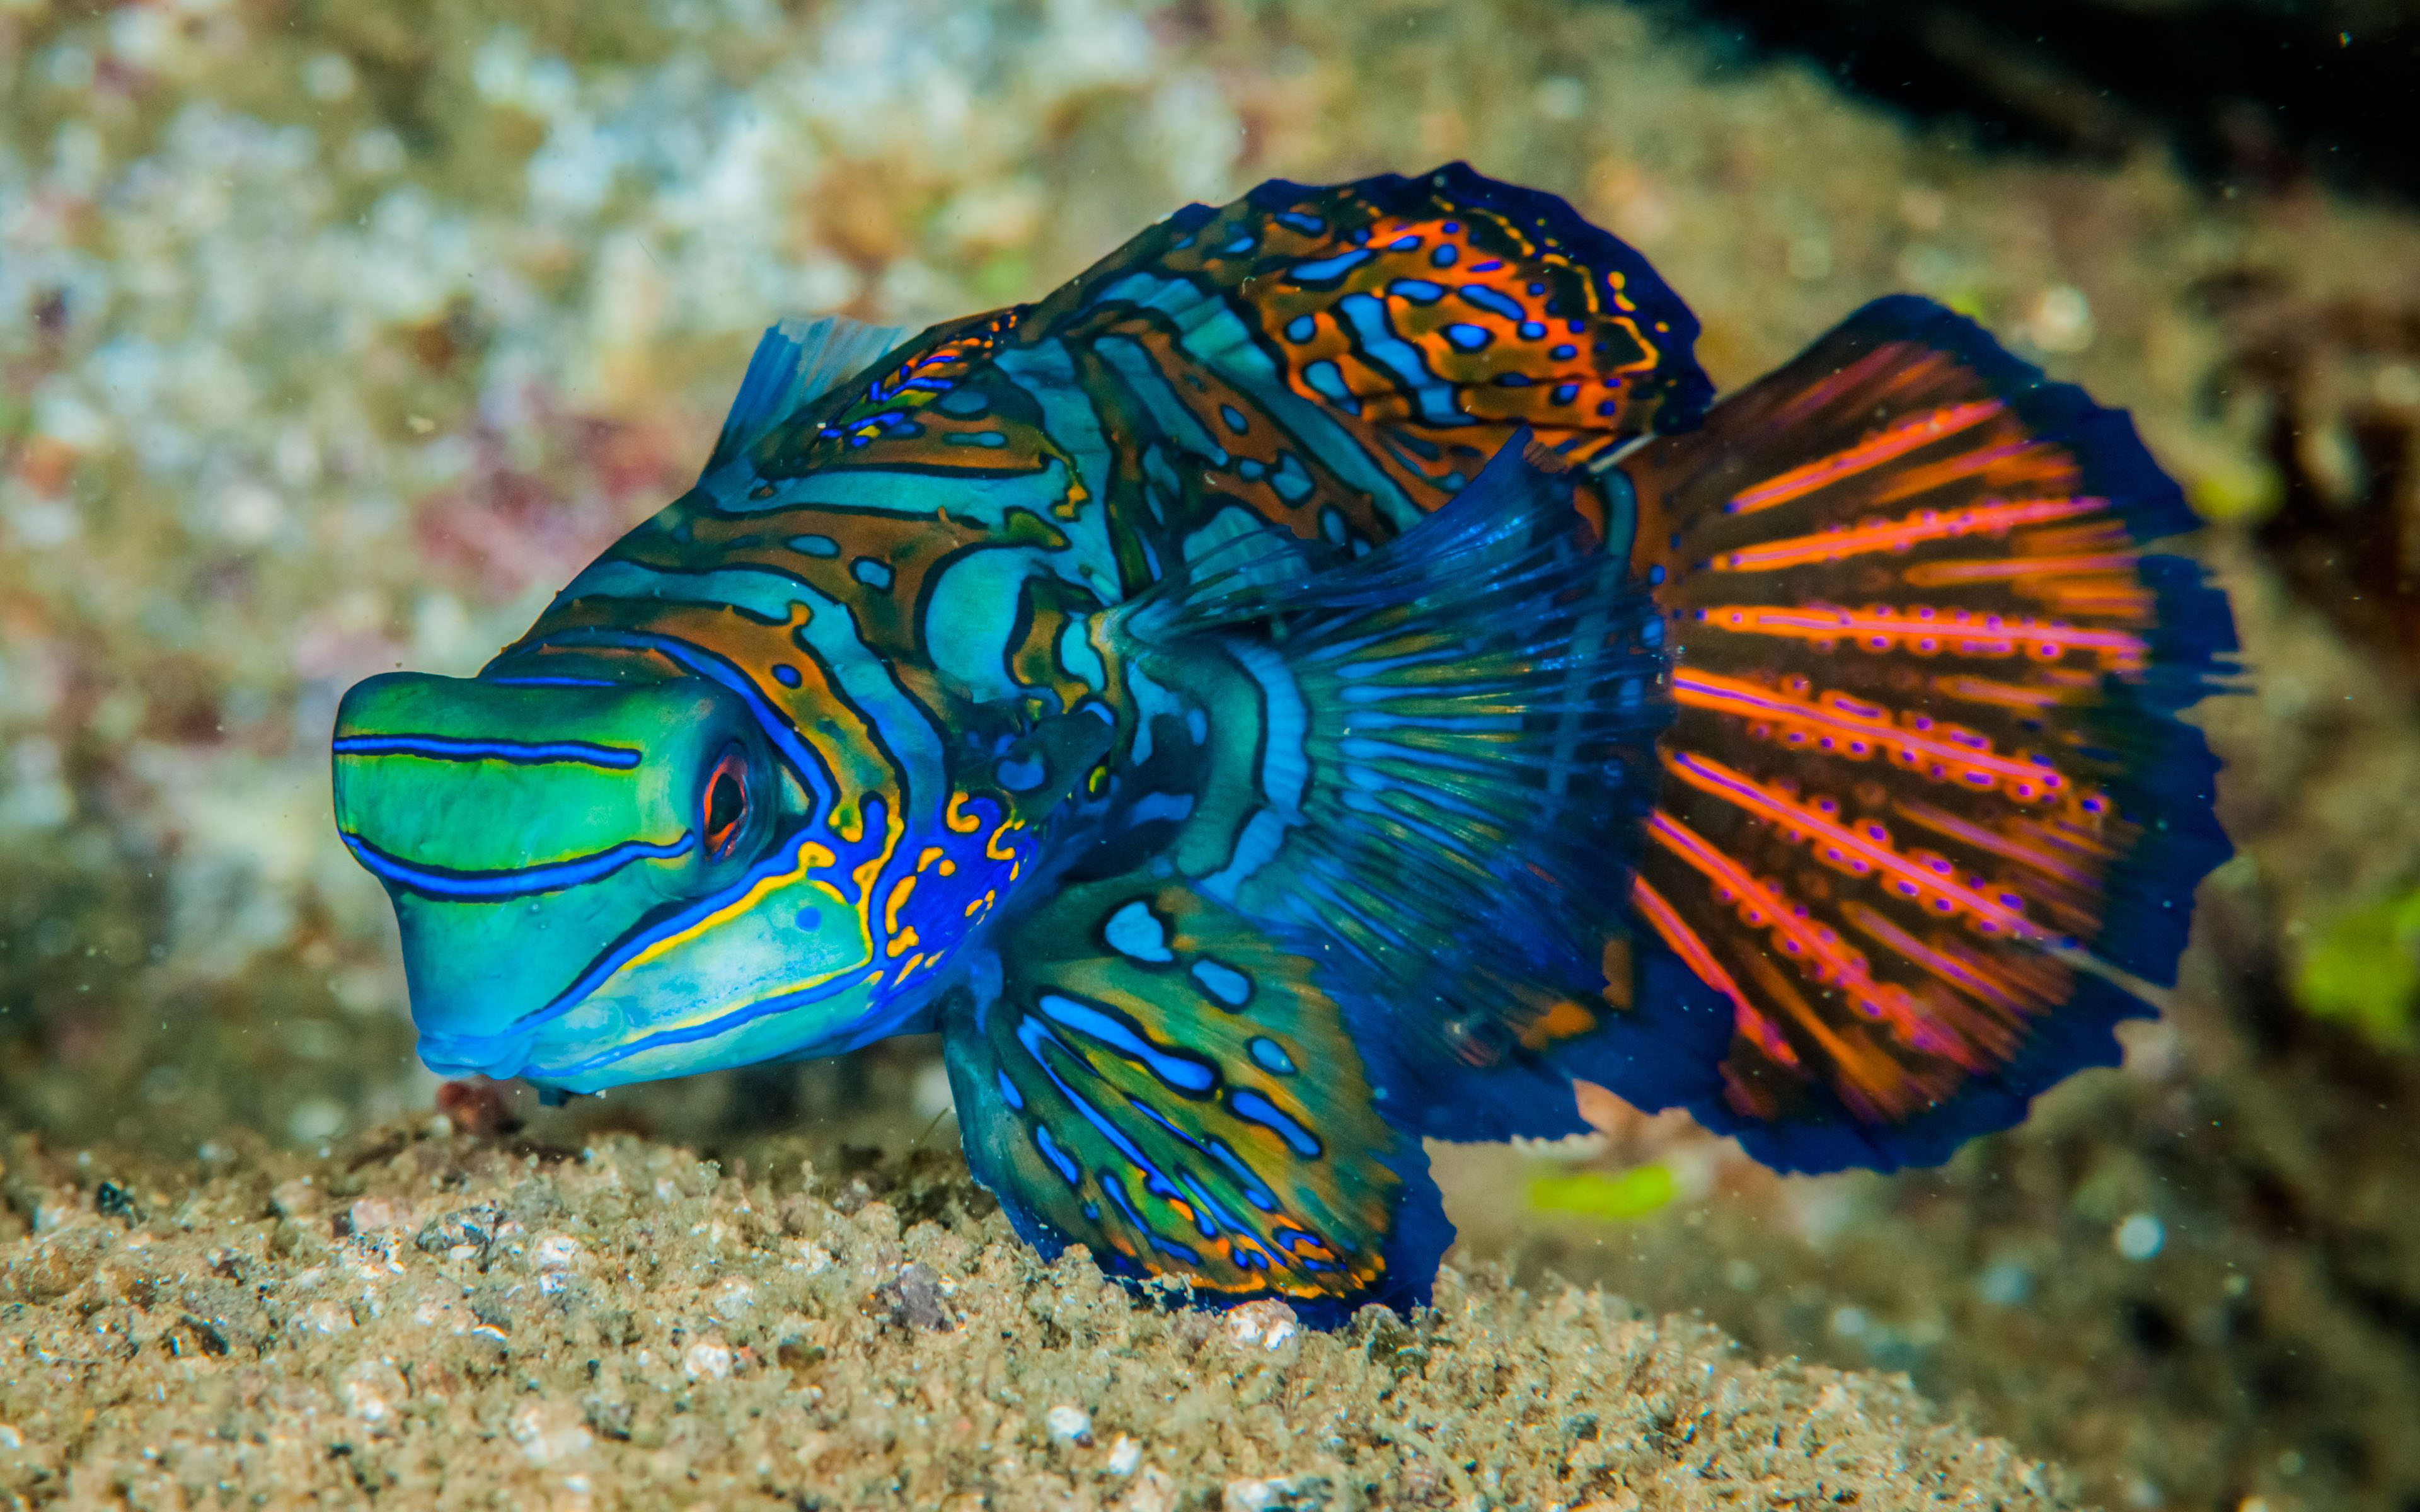 Mandarinfish Fish Is A Small Exotic Colorful Fish Of The Dragonet